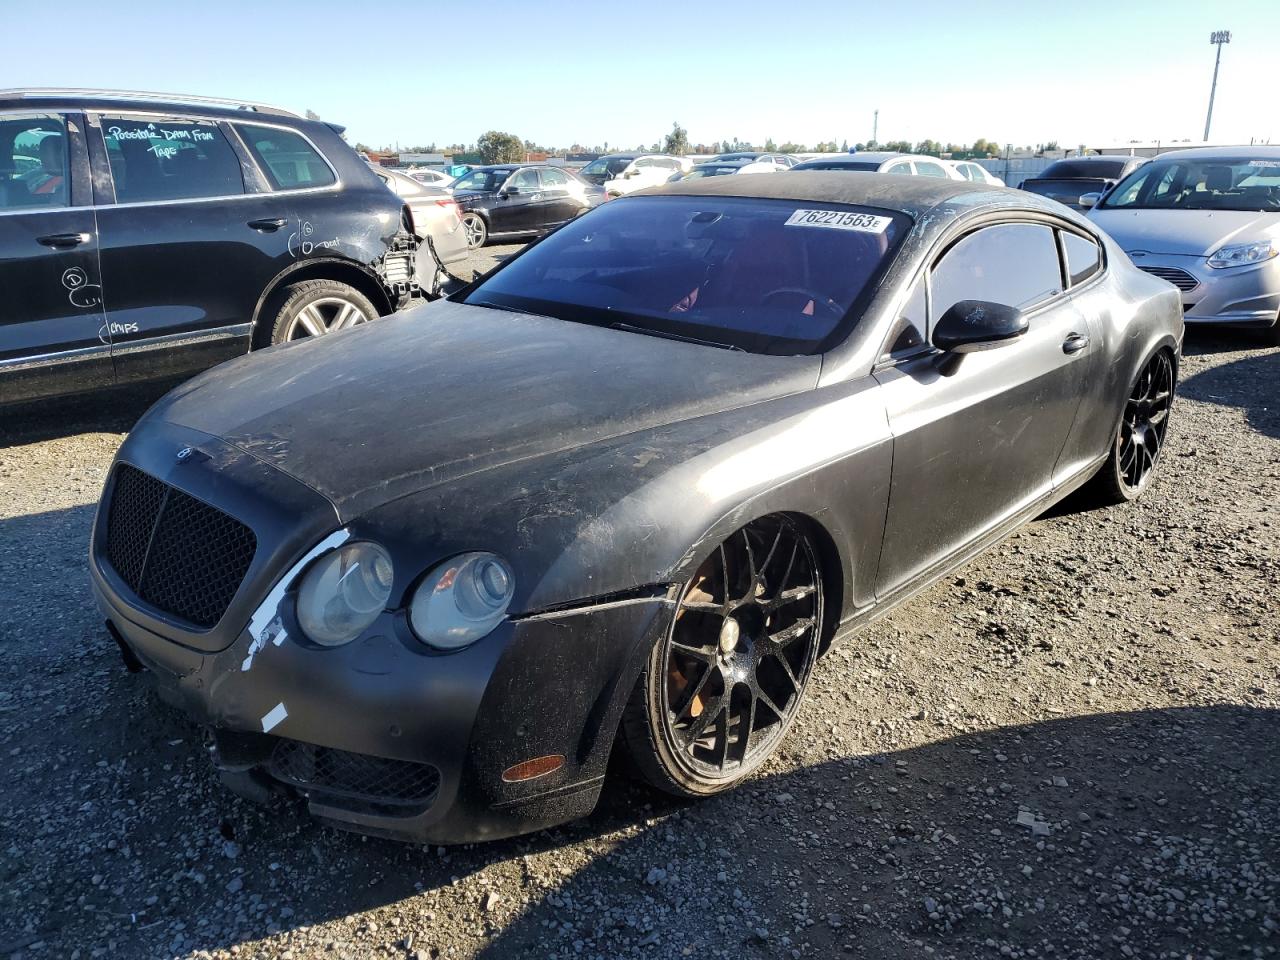 vin: SCBCR63W06C032687 SCBCR63W06C032687 2006 bentley continental 6000 for Sale in 95843 3930, Ca - Antelope, Antelope, USA